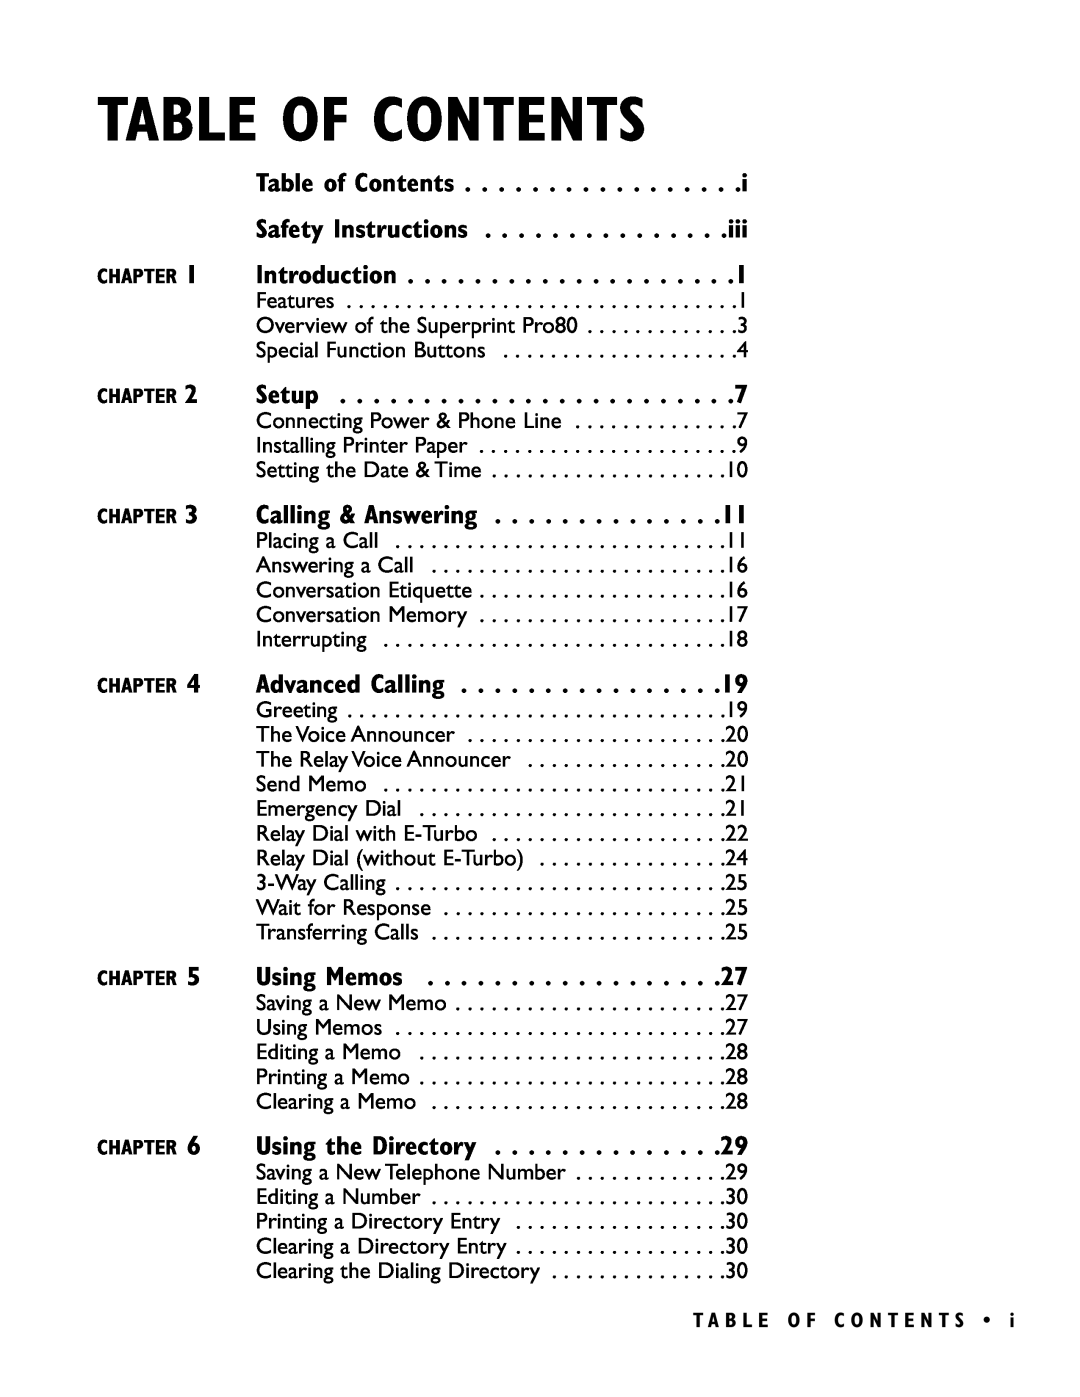 Ultratec PRO80TM Table Of Contents, Introduction, Setup, Using Memos, Table of Contents, Safety Instructions, Chapter 